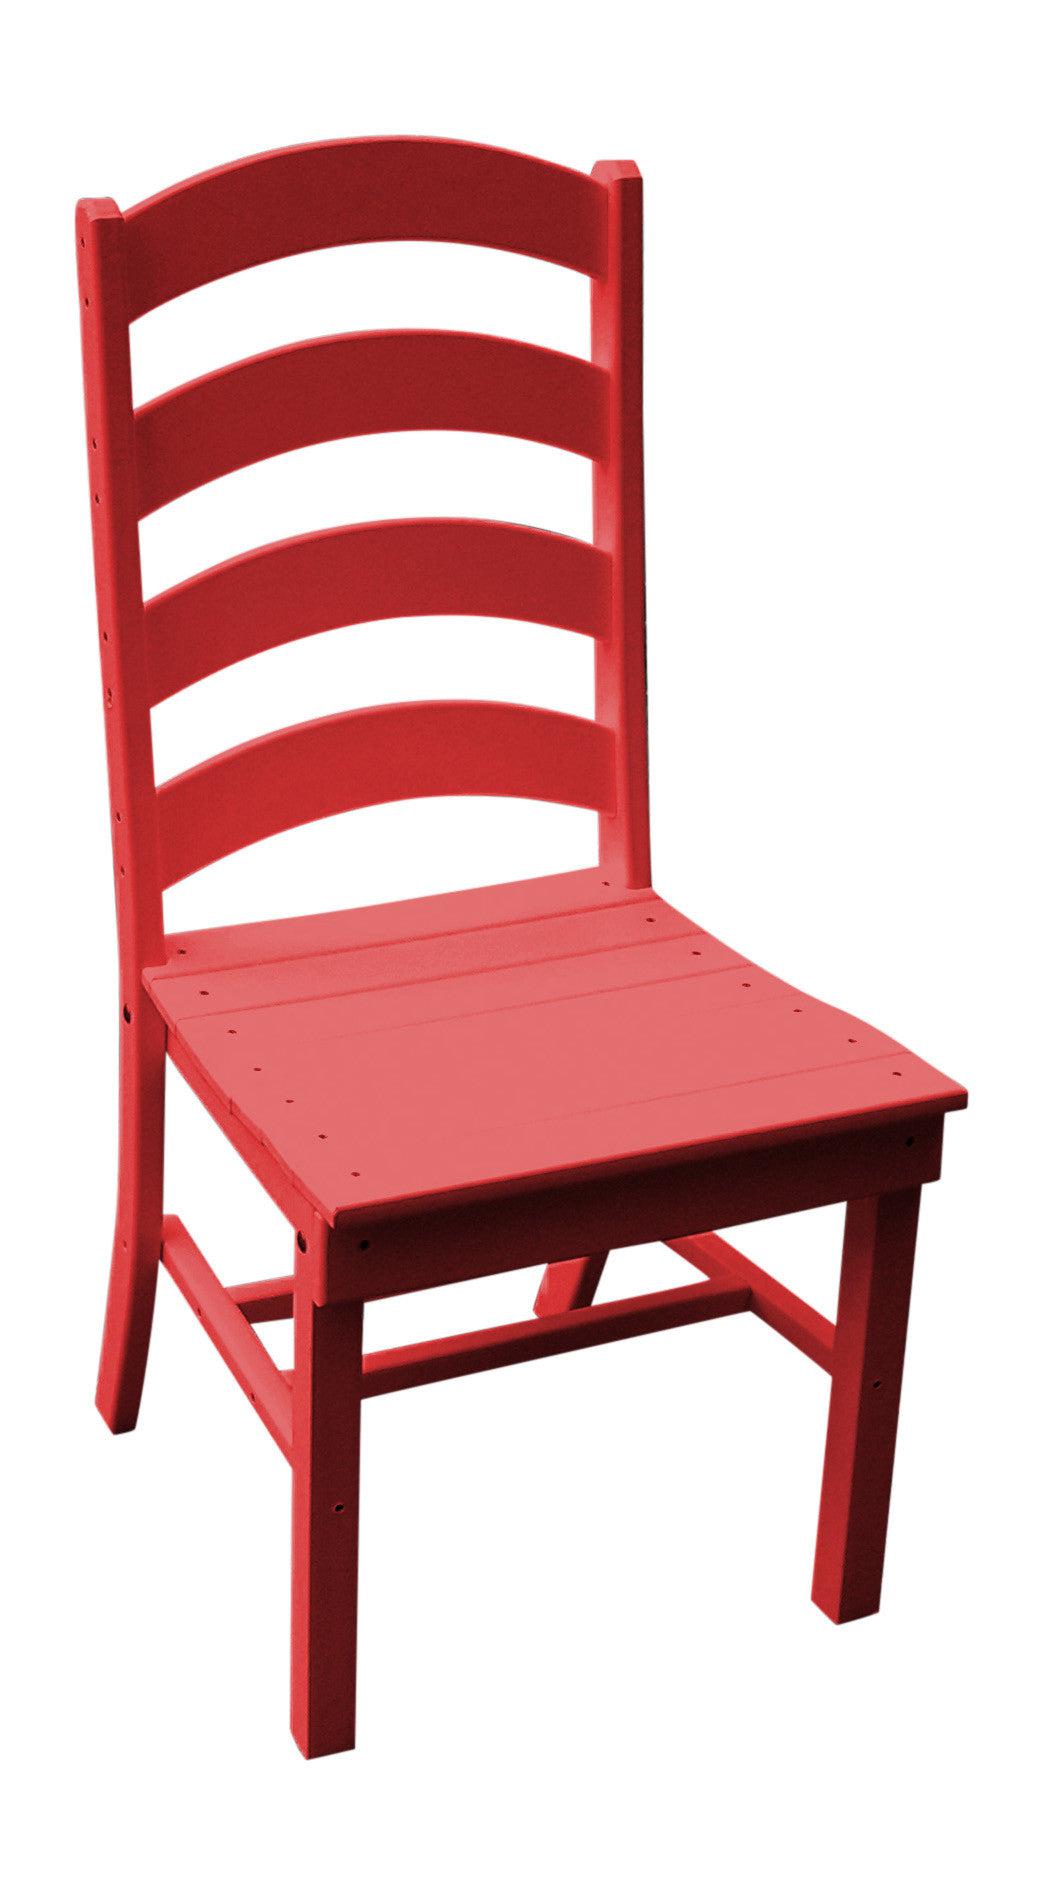 A&L Furniture Company Recycled Plastic Ladderback Dining Chair - Bright Red